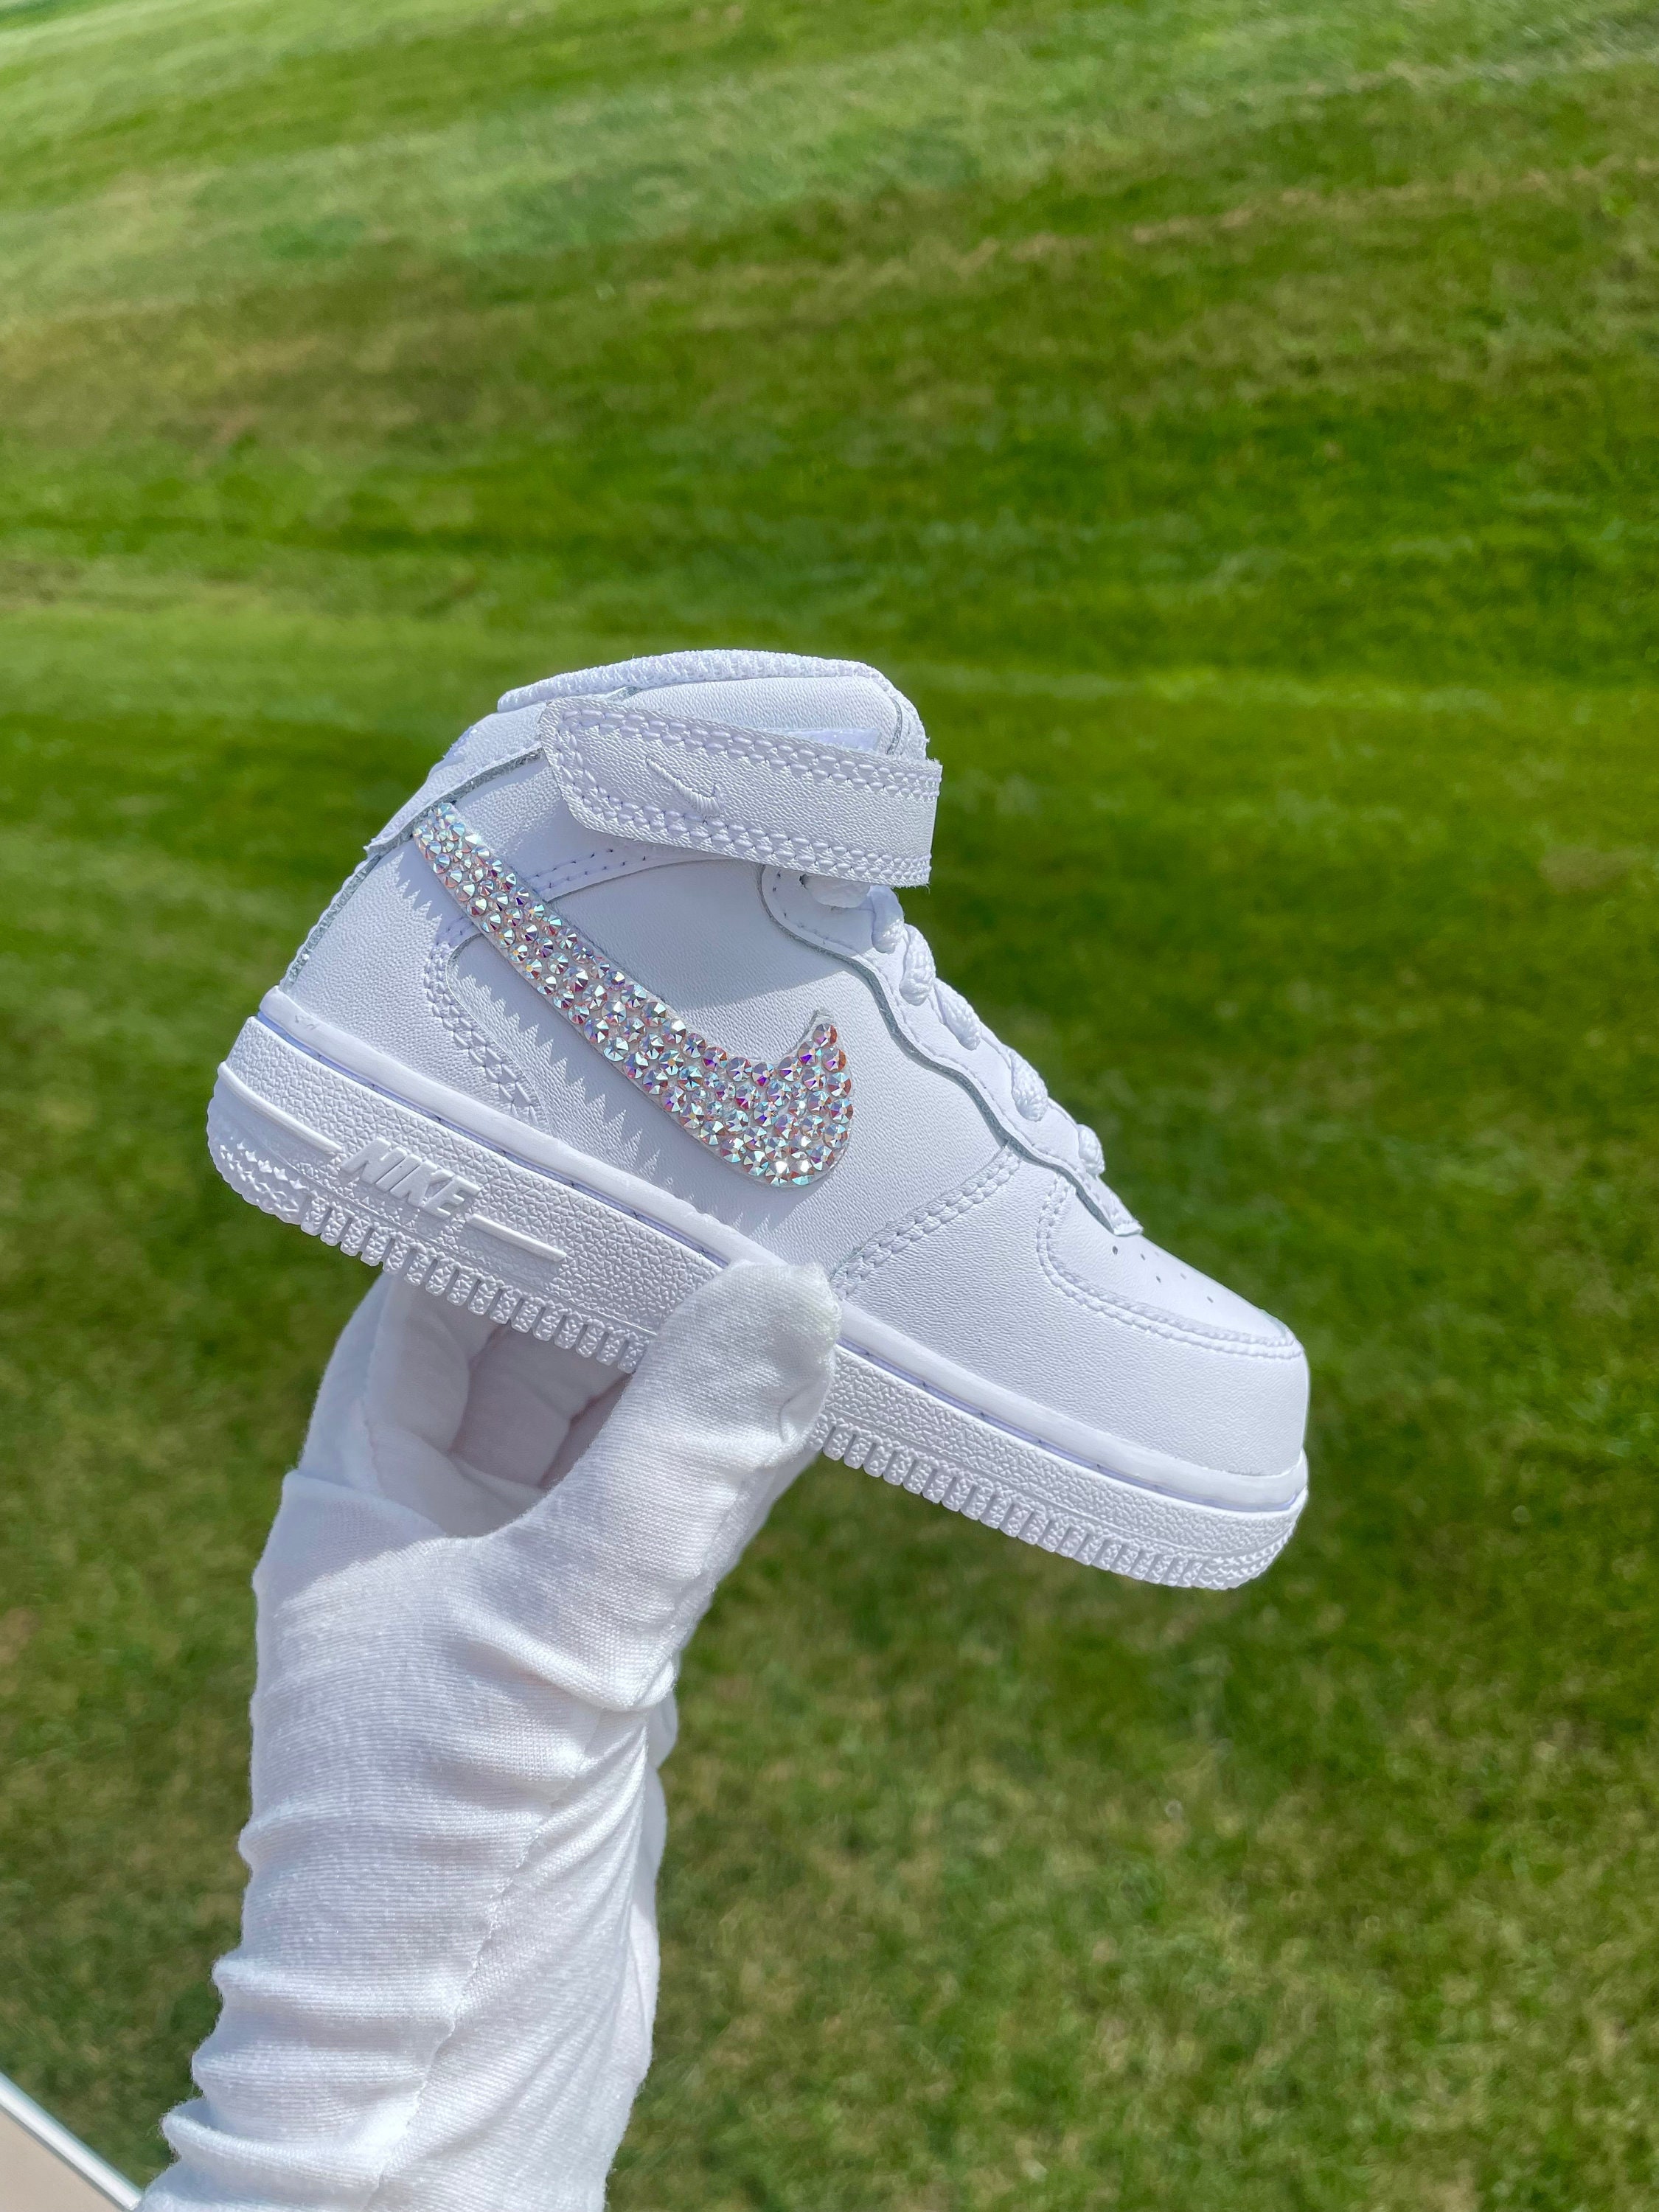 LV Colour changing AF1s  Cute nike shoes, White nike shoes